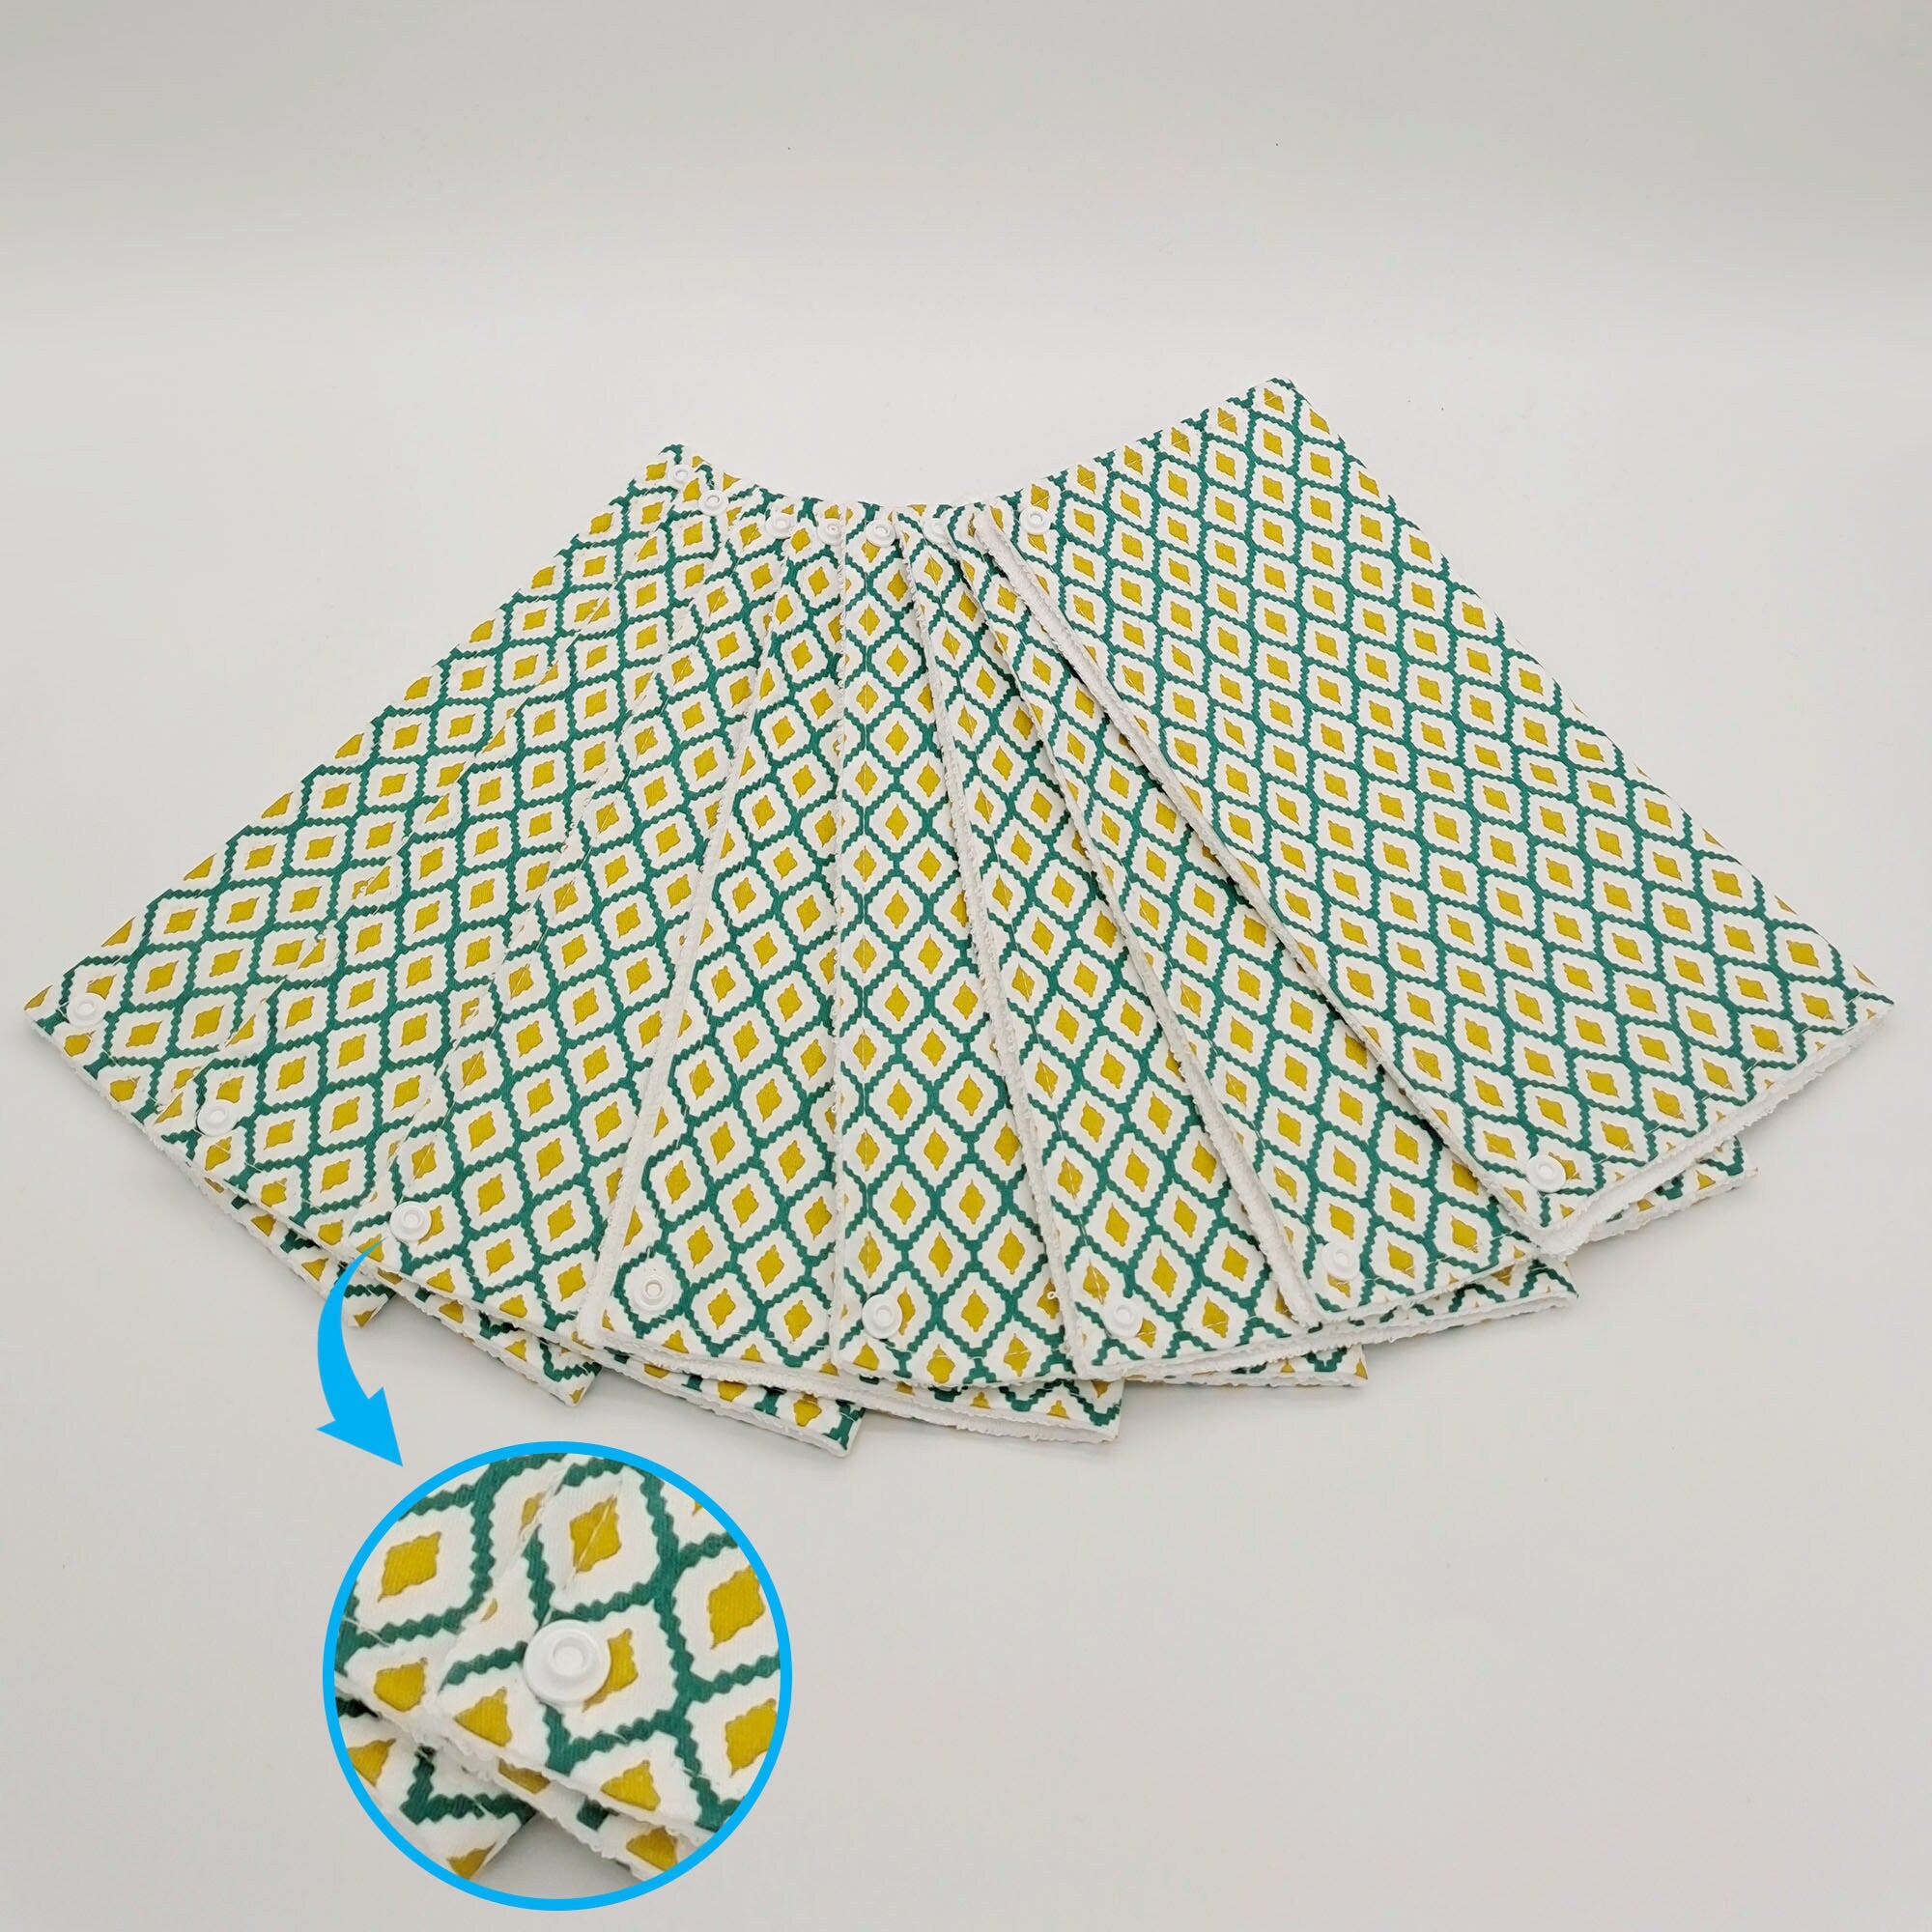 Reusable Paperless Towels Washable, Eco-friendly cloth towels, Reusable paperless towels roll with snaps, — Yellow Green Geometric Print